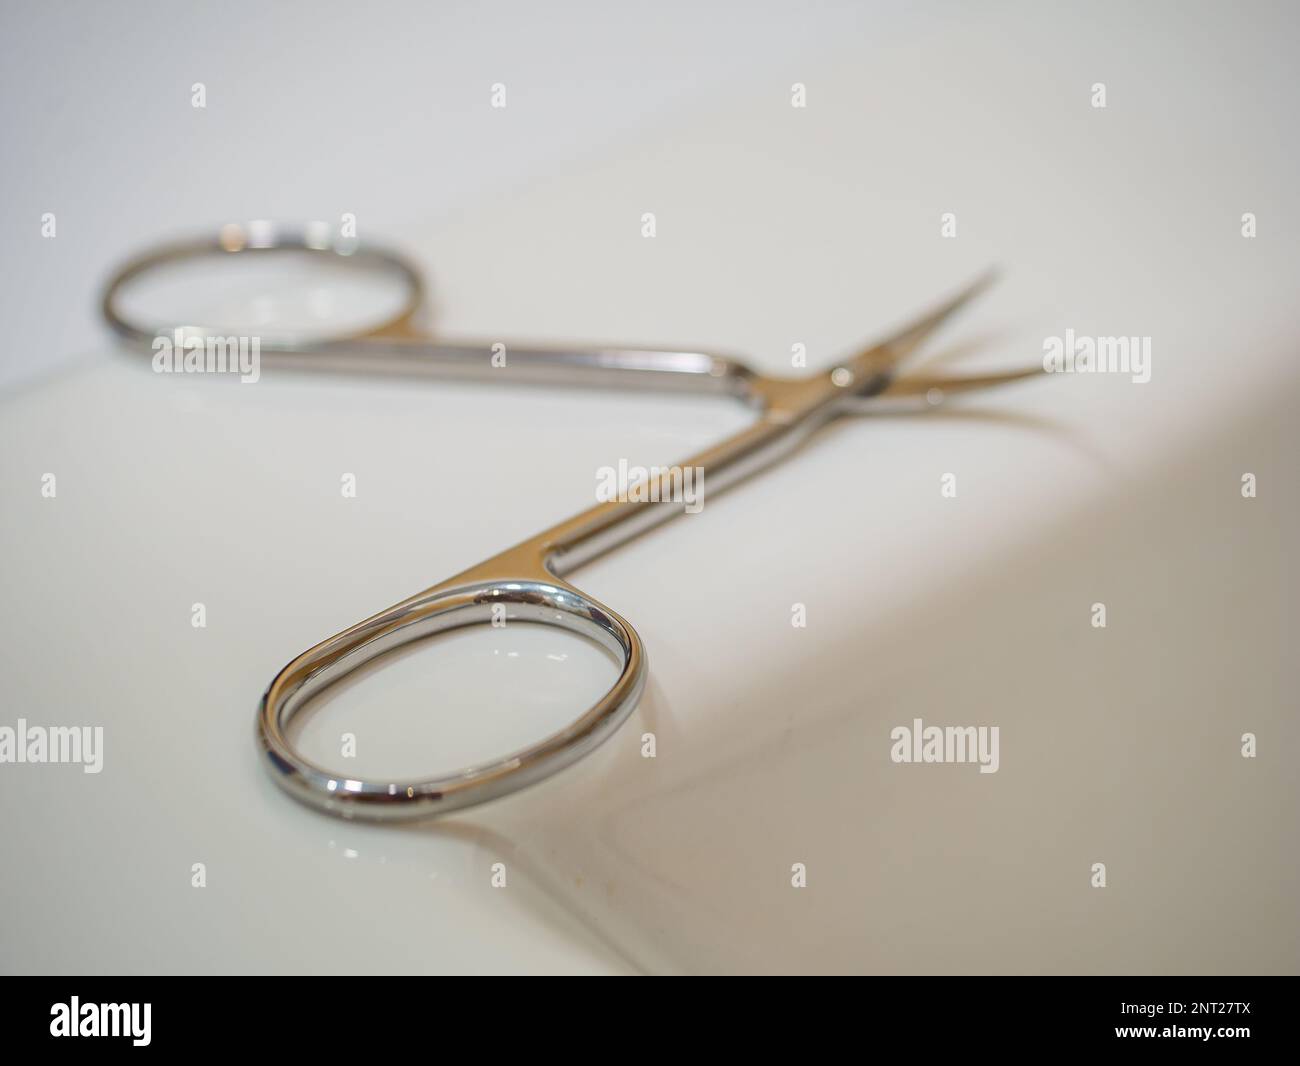 Manicure scissors for nails on a white background. Stock Photo